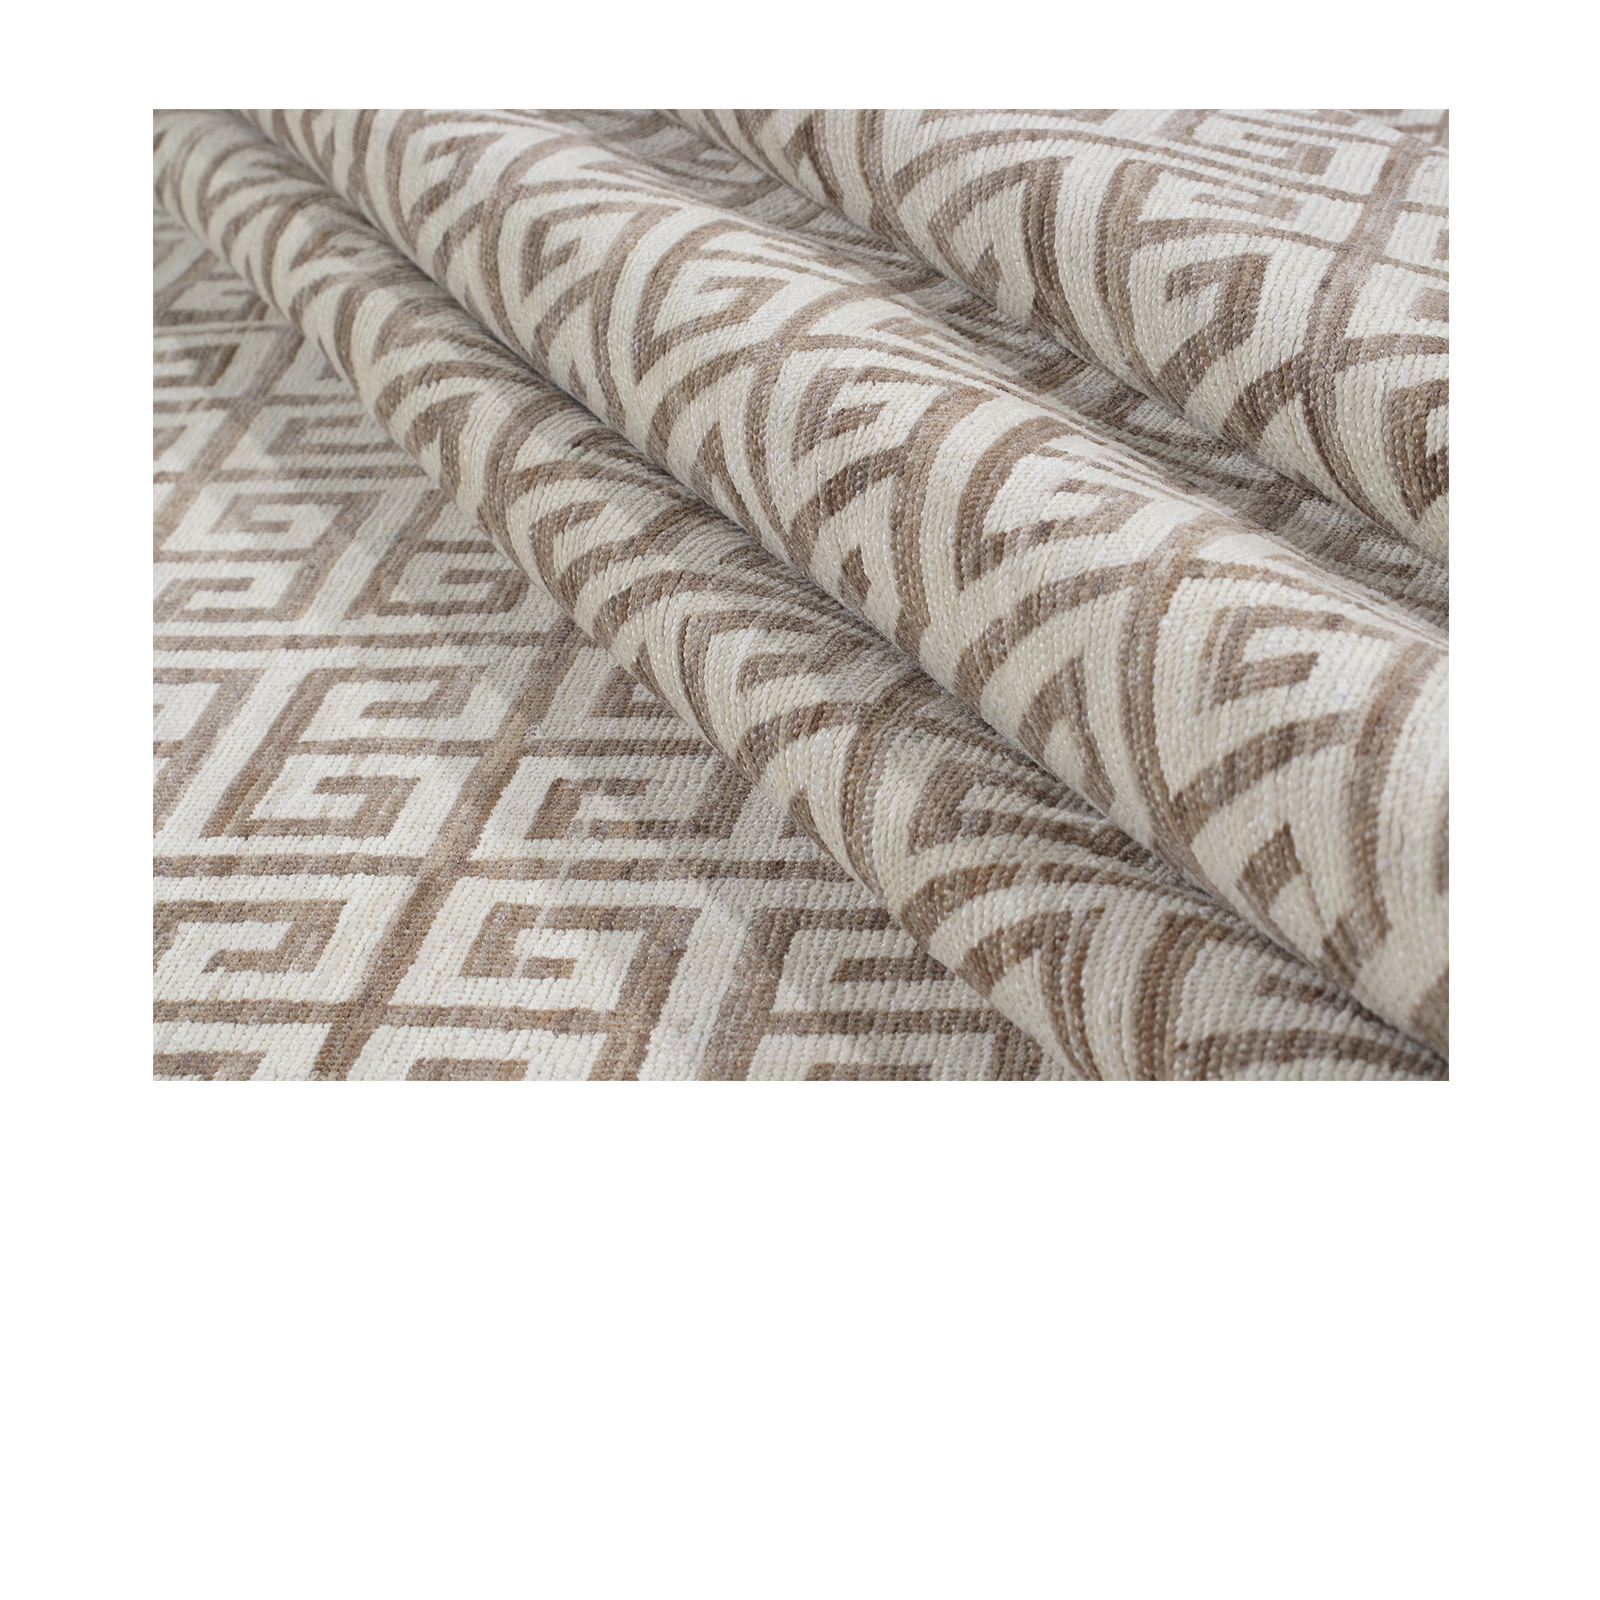 This Olympia rug is hand-knotted with modern touch design and made of 100% wool. 